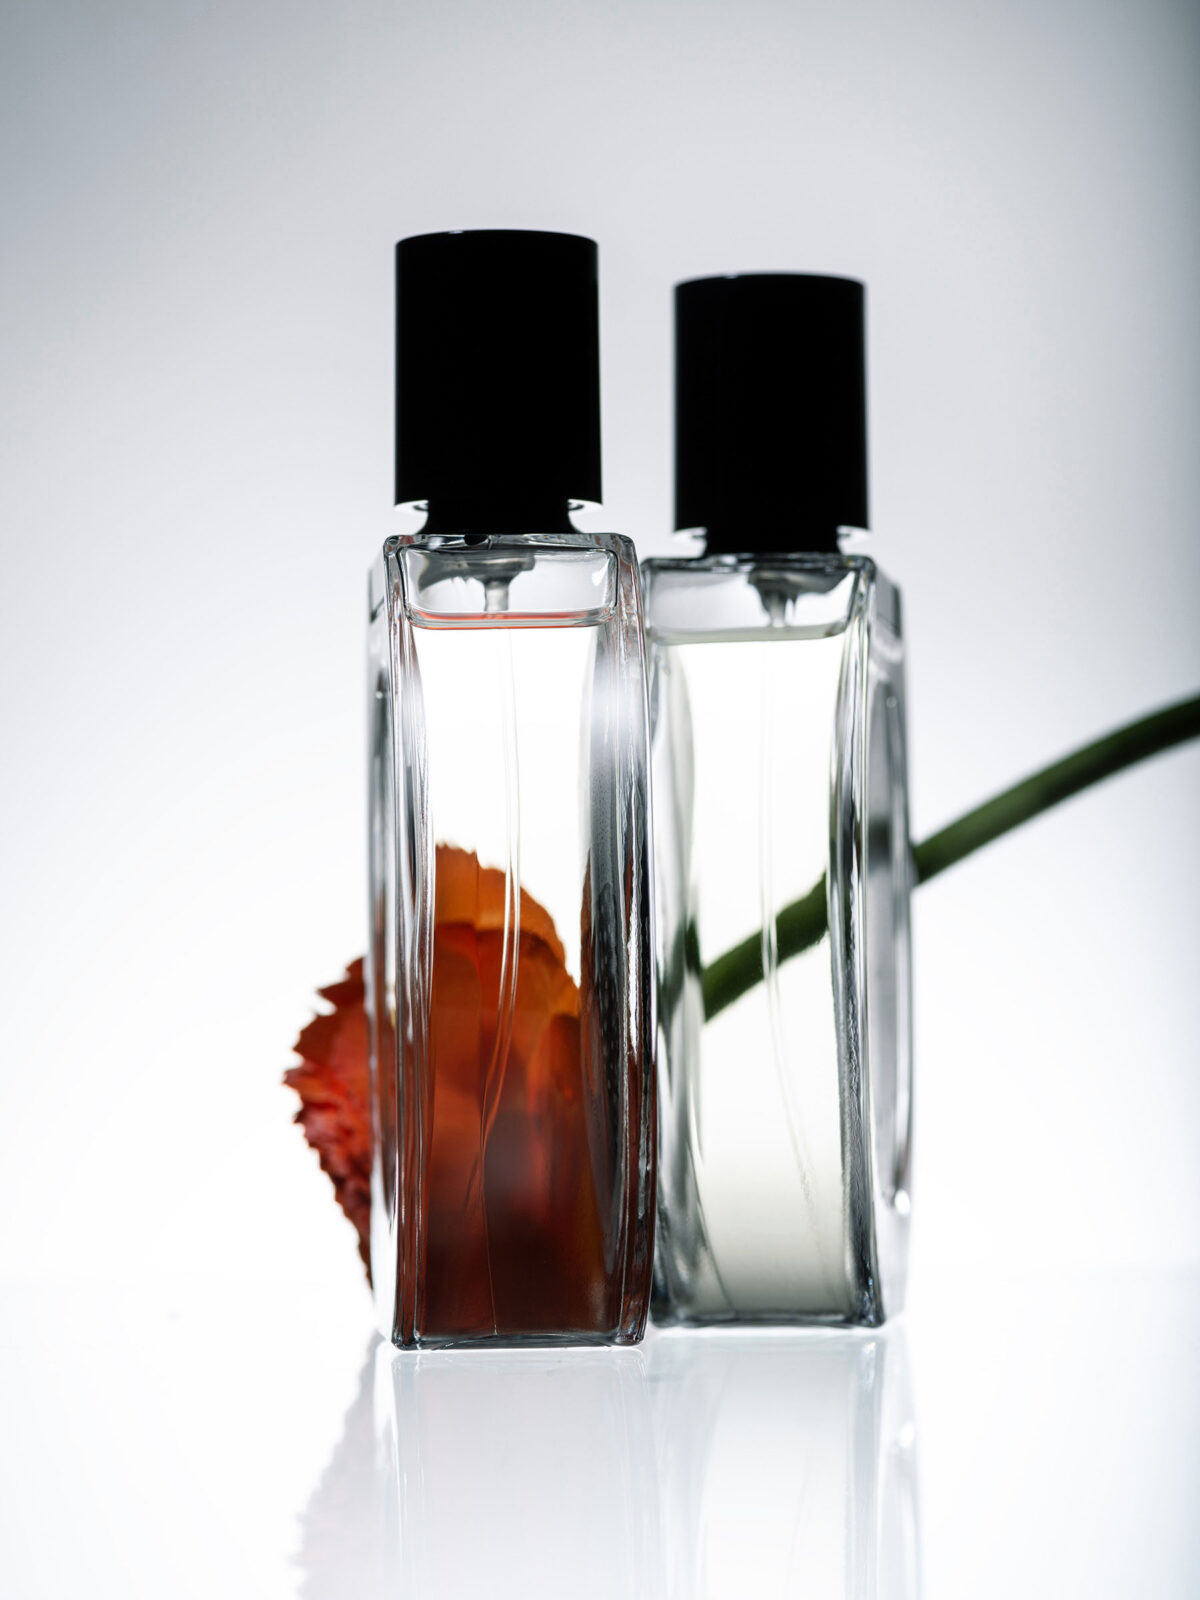 diptyque, beauty, beauty product, fragrance, perfume, productphotography, stilllife, photography, klas foerster